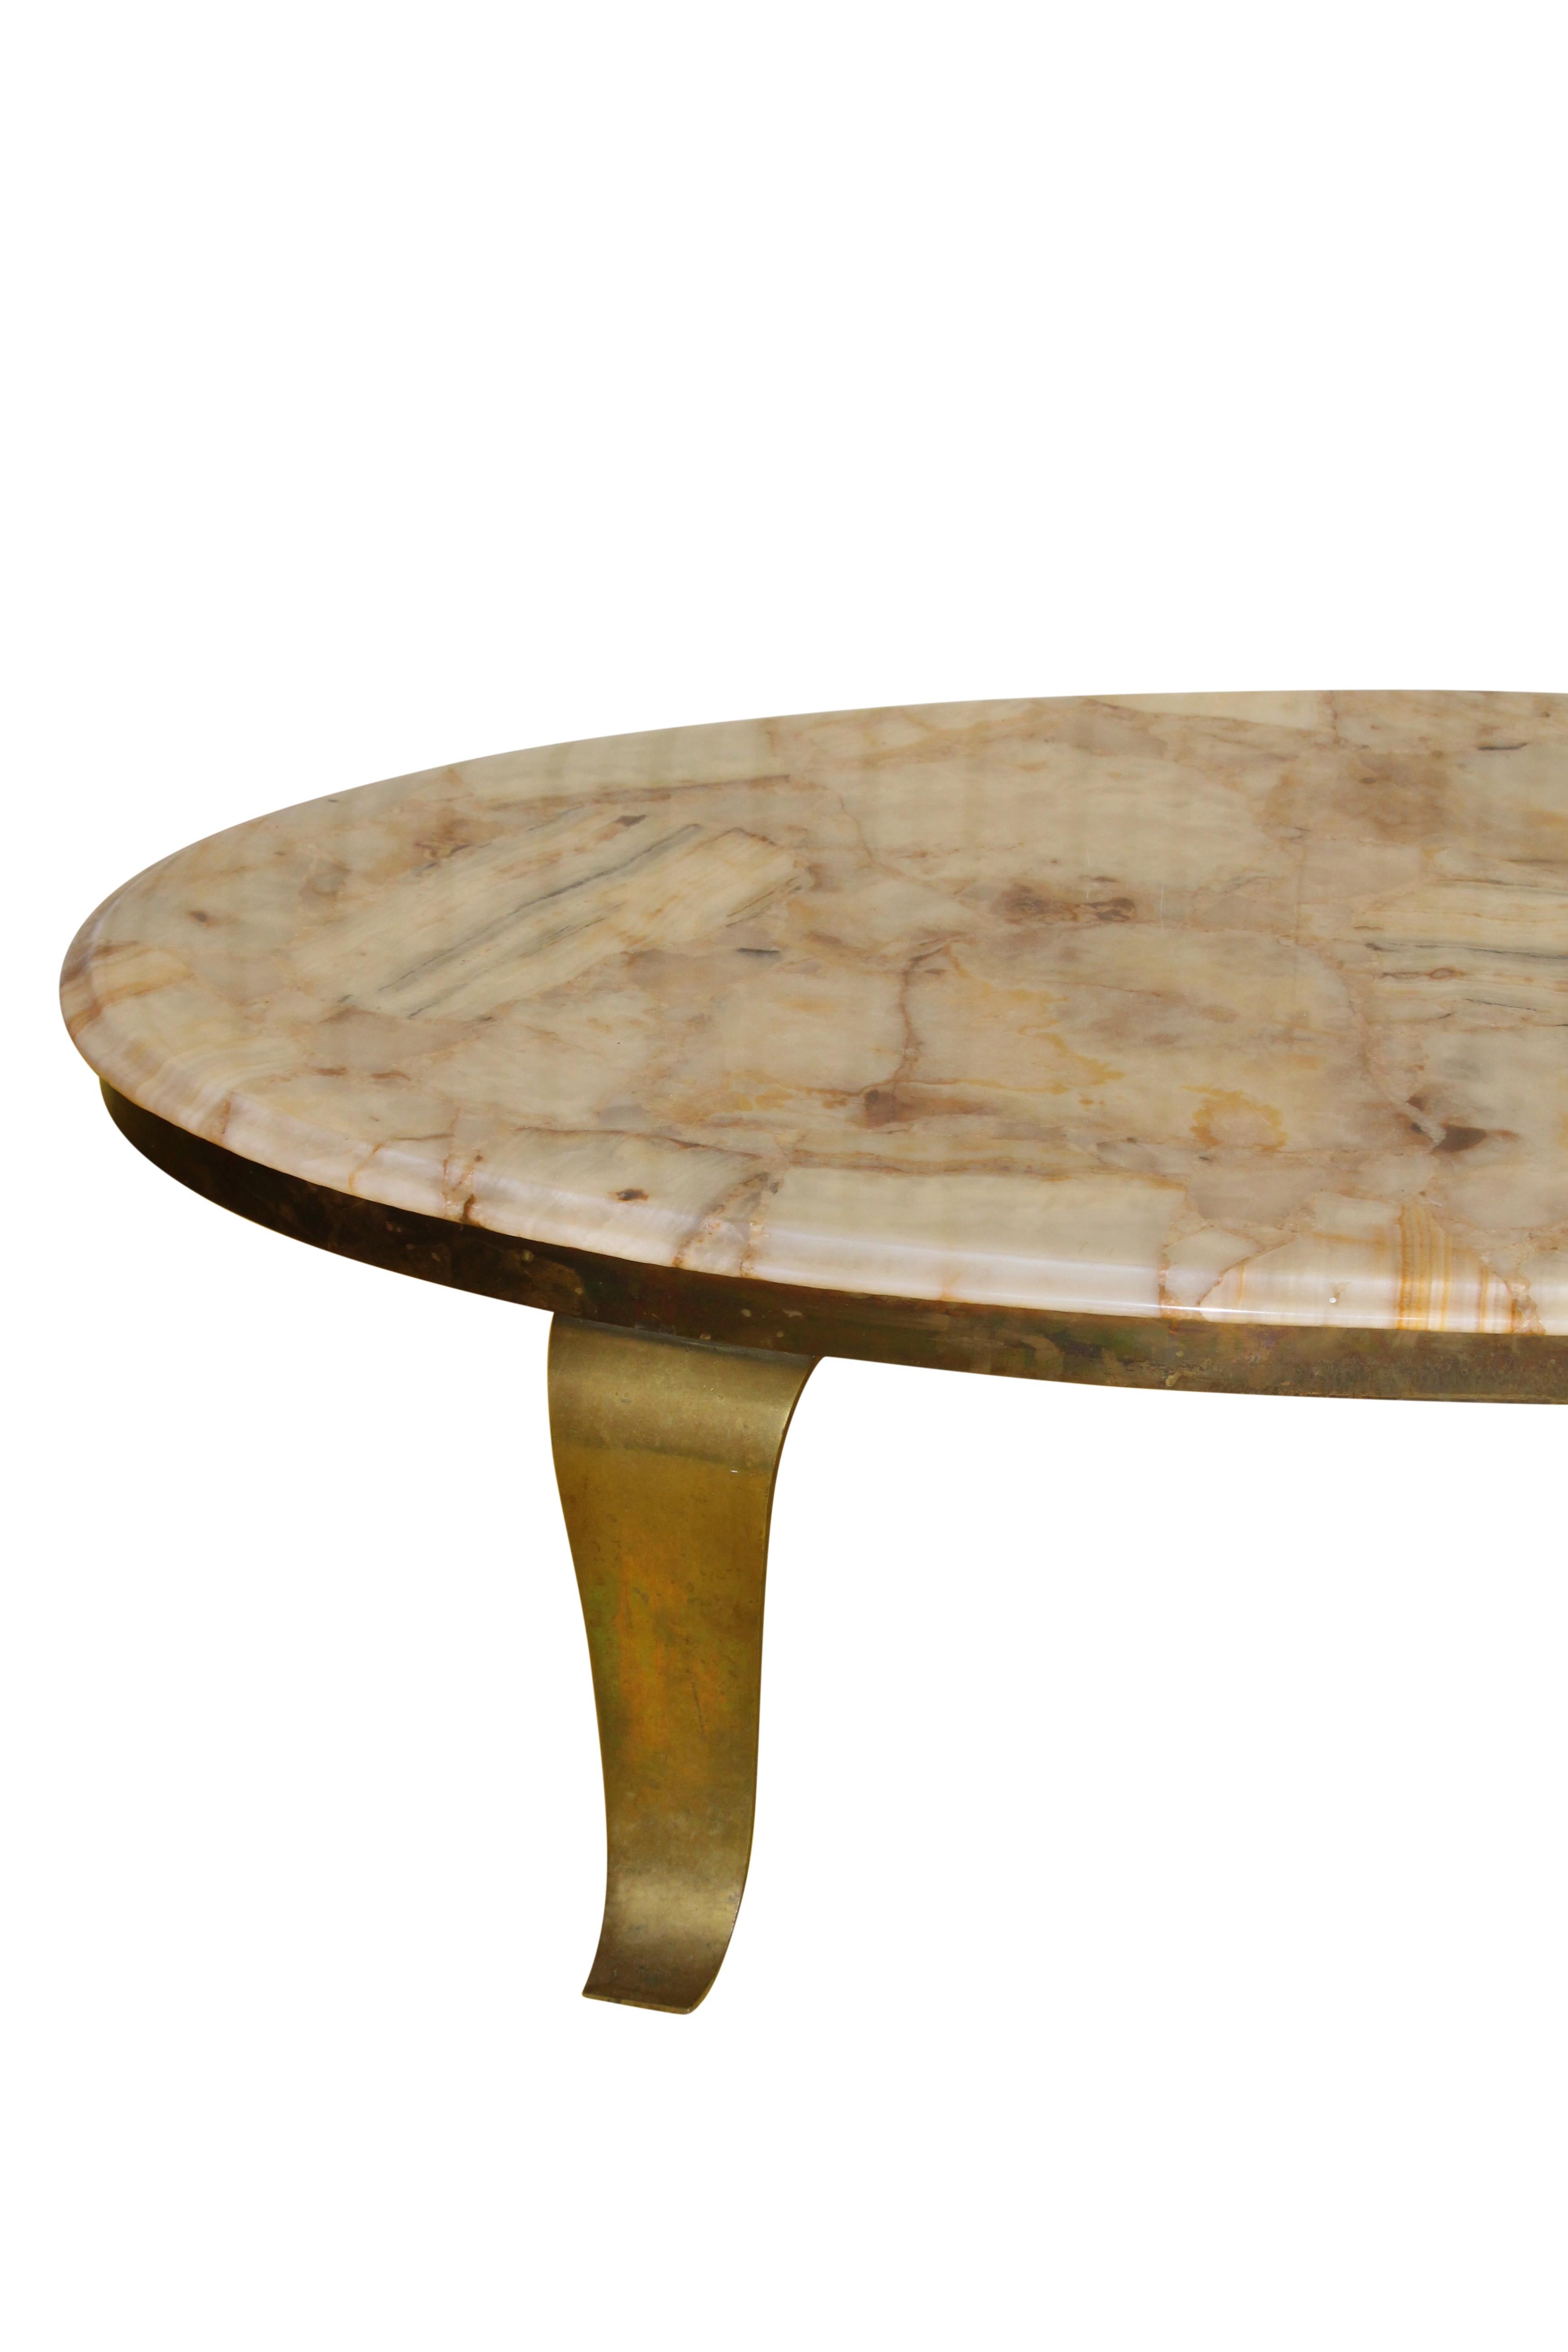 This Mid-Century Modern onyx and brass coffee table makes an elegant statement with its oval shape and delicately curved brass legs. Good condition for vintage status. The veining in the onyx is stunning and the colors emanates a soft glow.